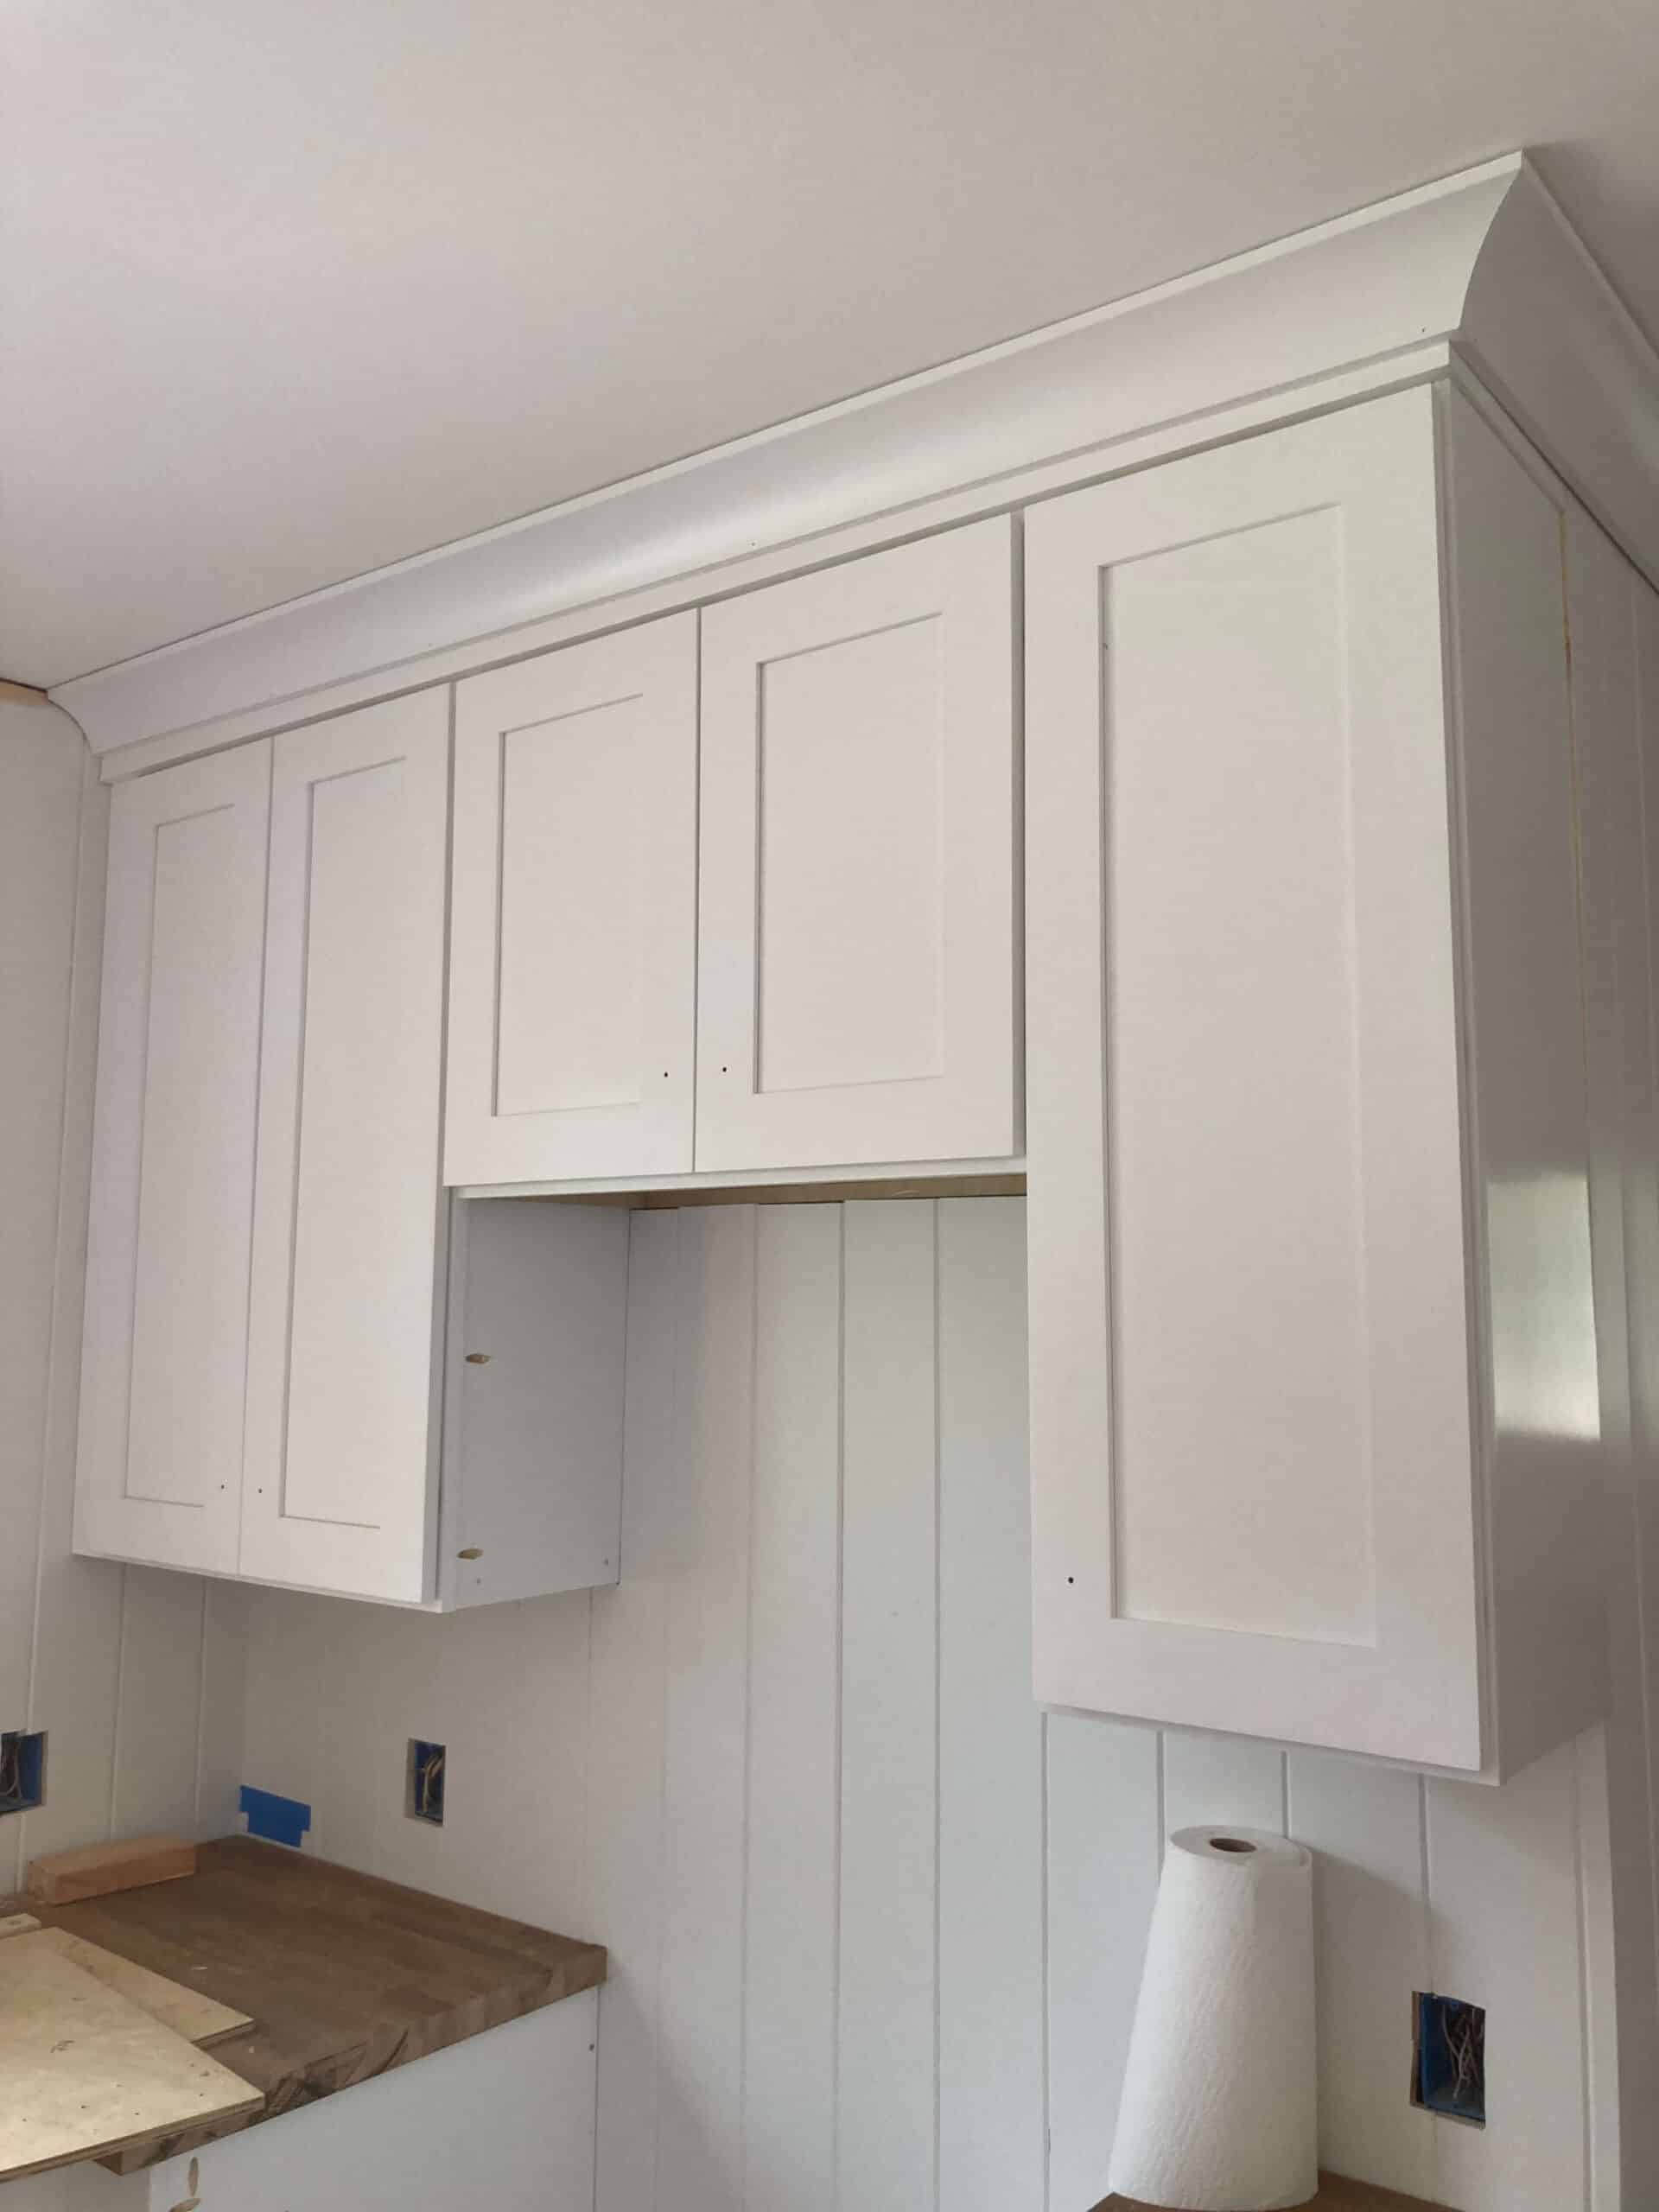 new white shaker cabinets hung in a kitchen